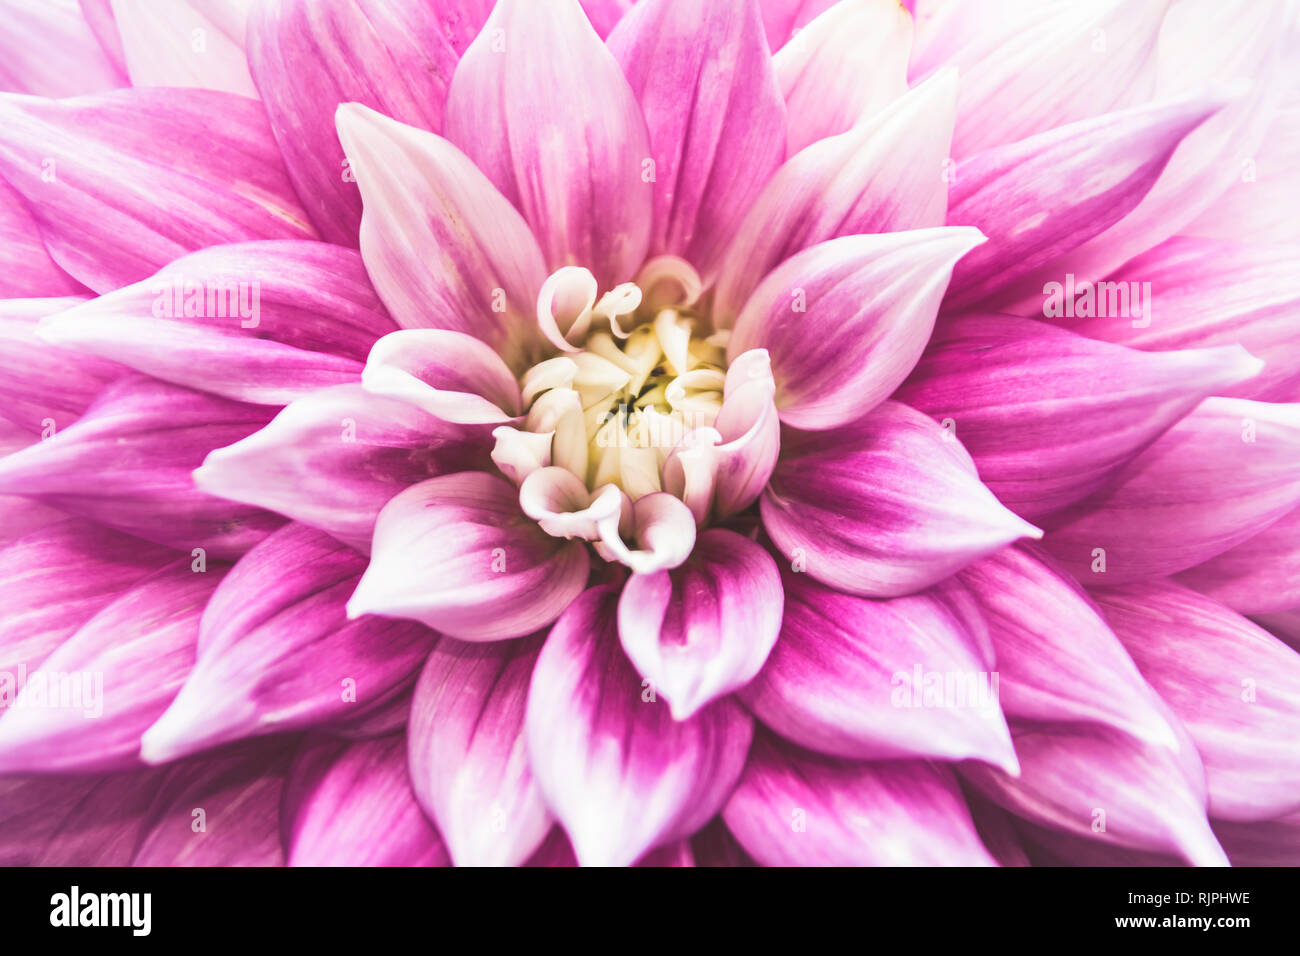 Purple white dahlia pinnata single flower petal in isolated close up details in muted elegant filter Stock Photo